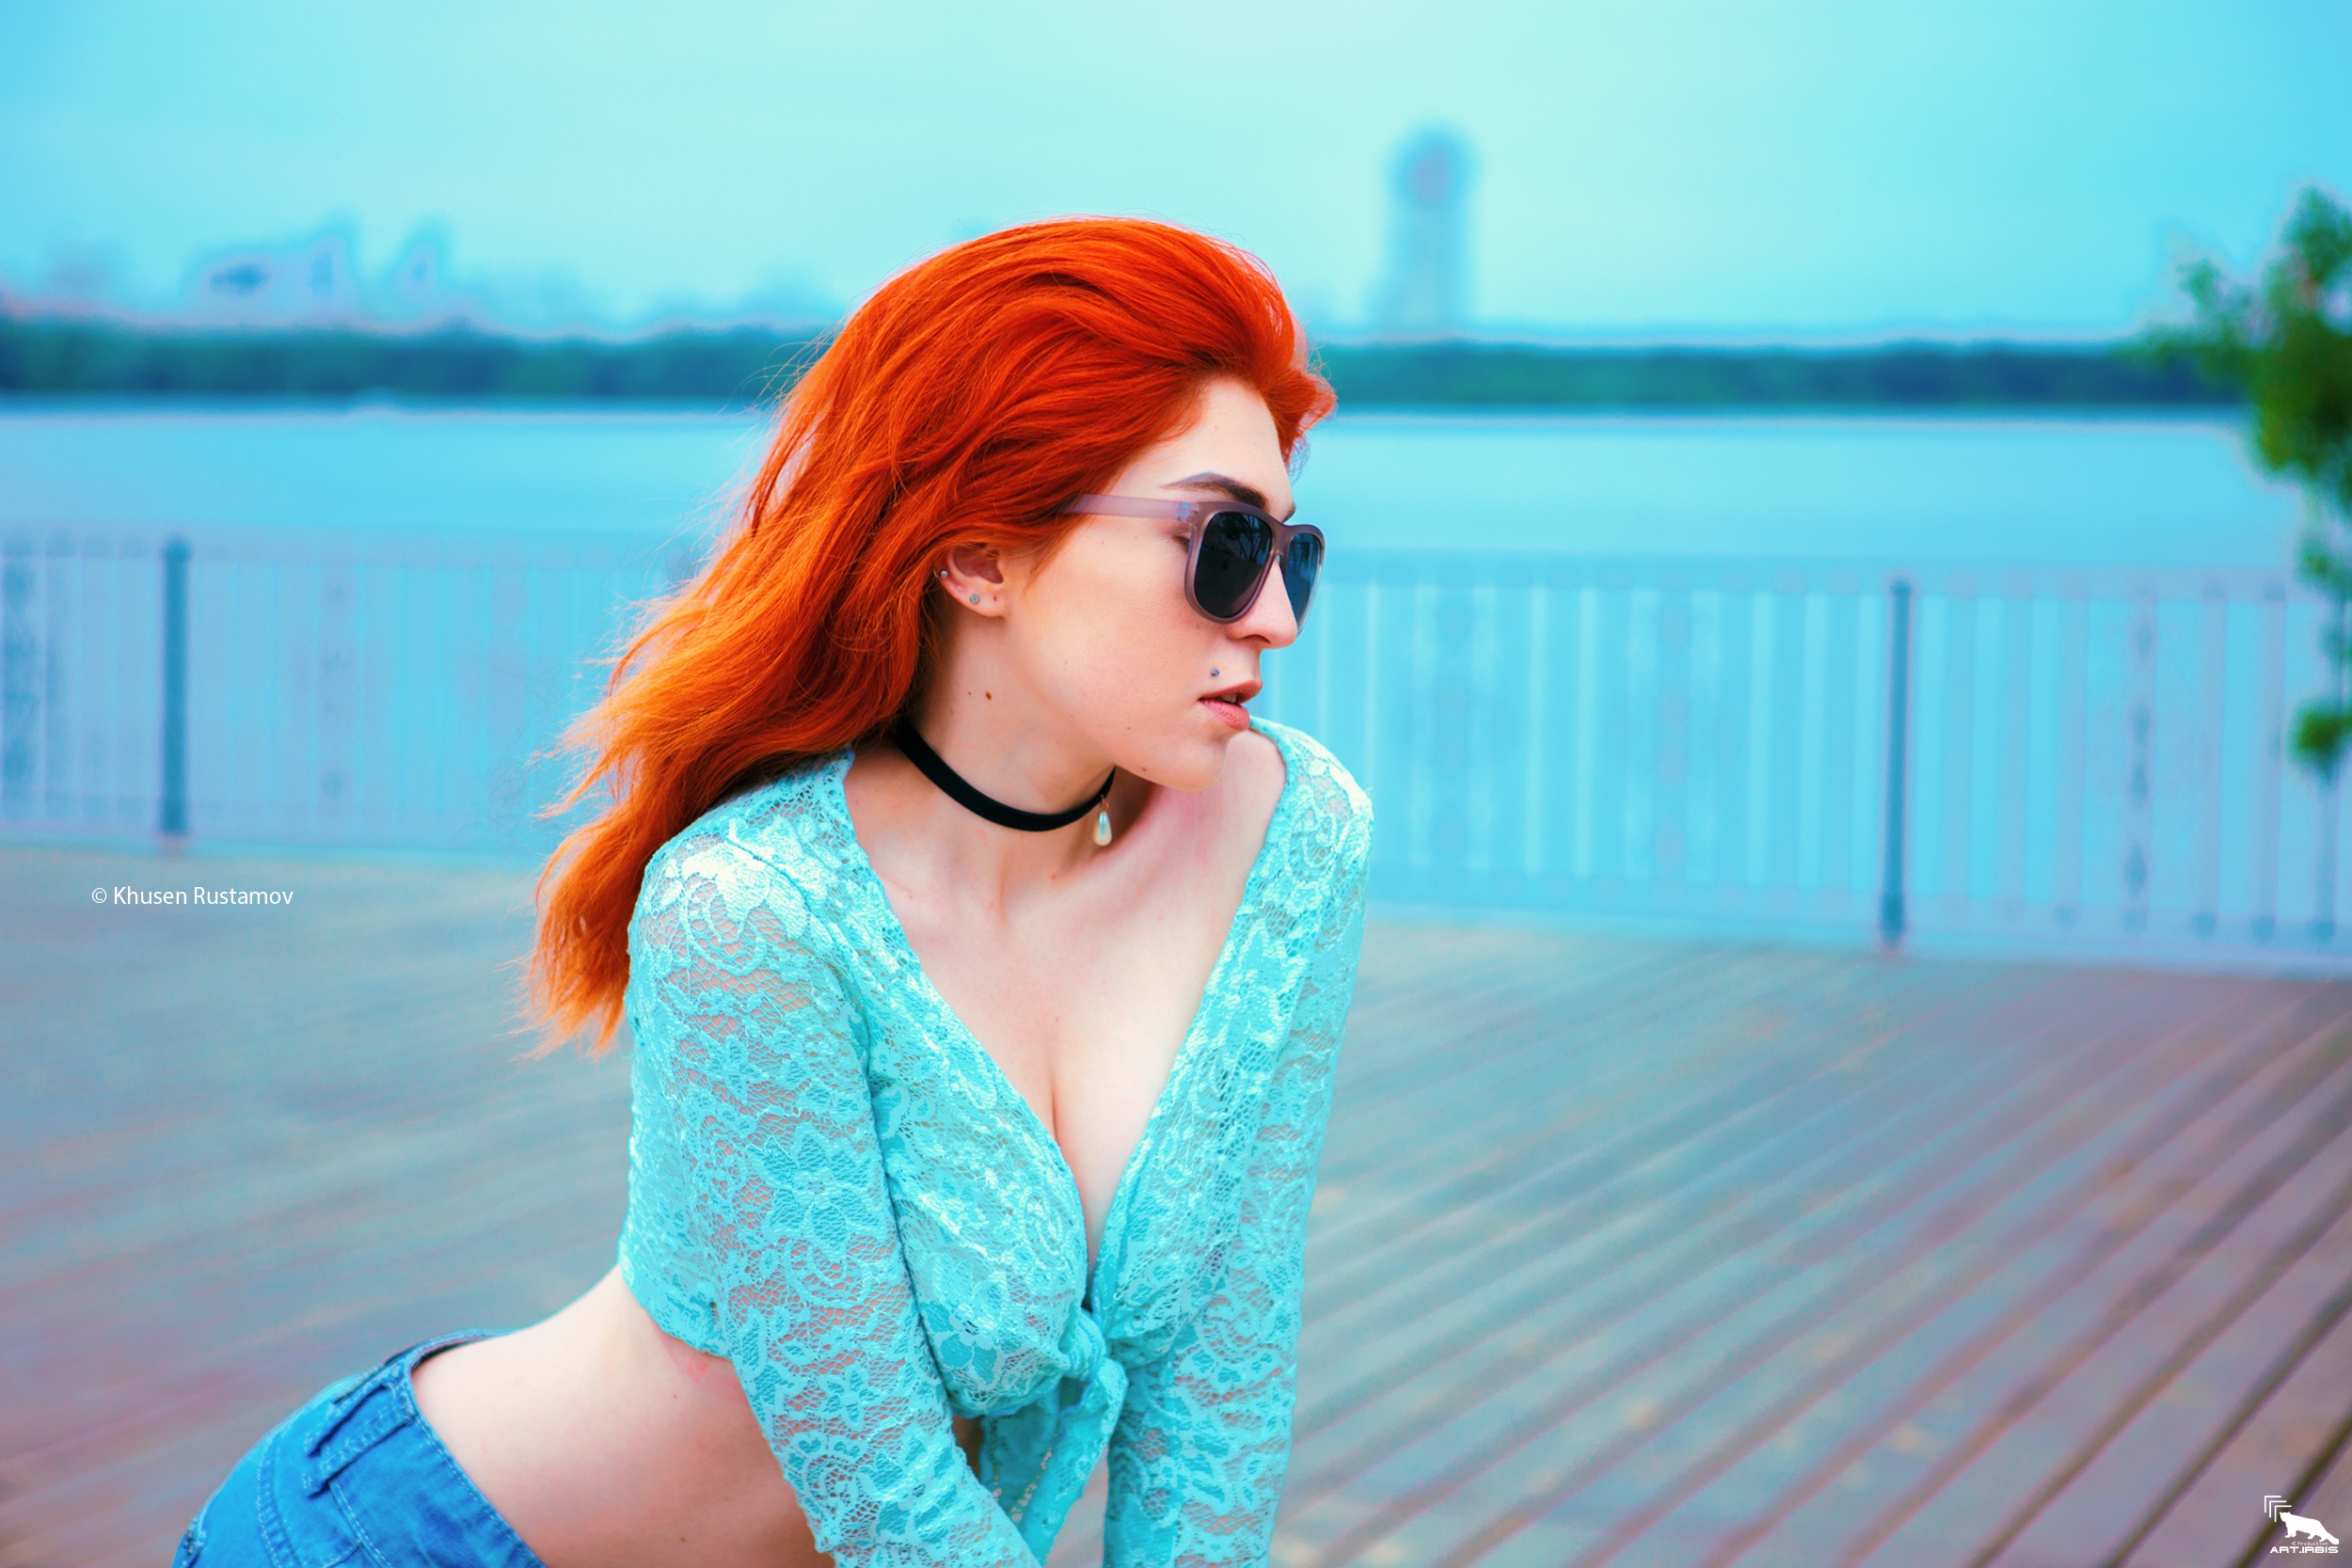 People 2500x1667 Maria Inasaridze women model redhead long hair women with shades sunglasses necklace cleavage tied top see-through clothing no bra belly jean shorts profile depth of field outdoors women outdoors Khusen Rustamov cyan